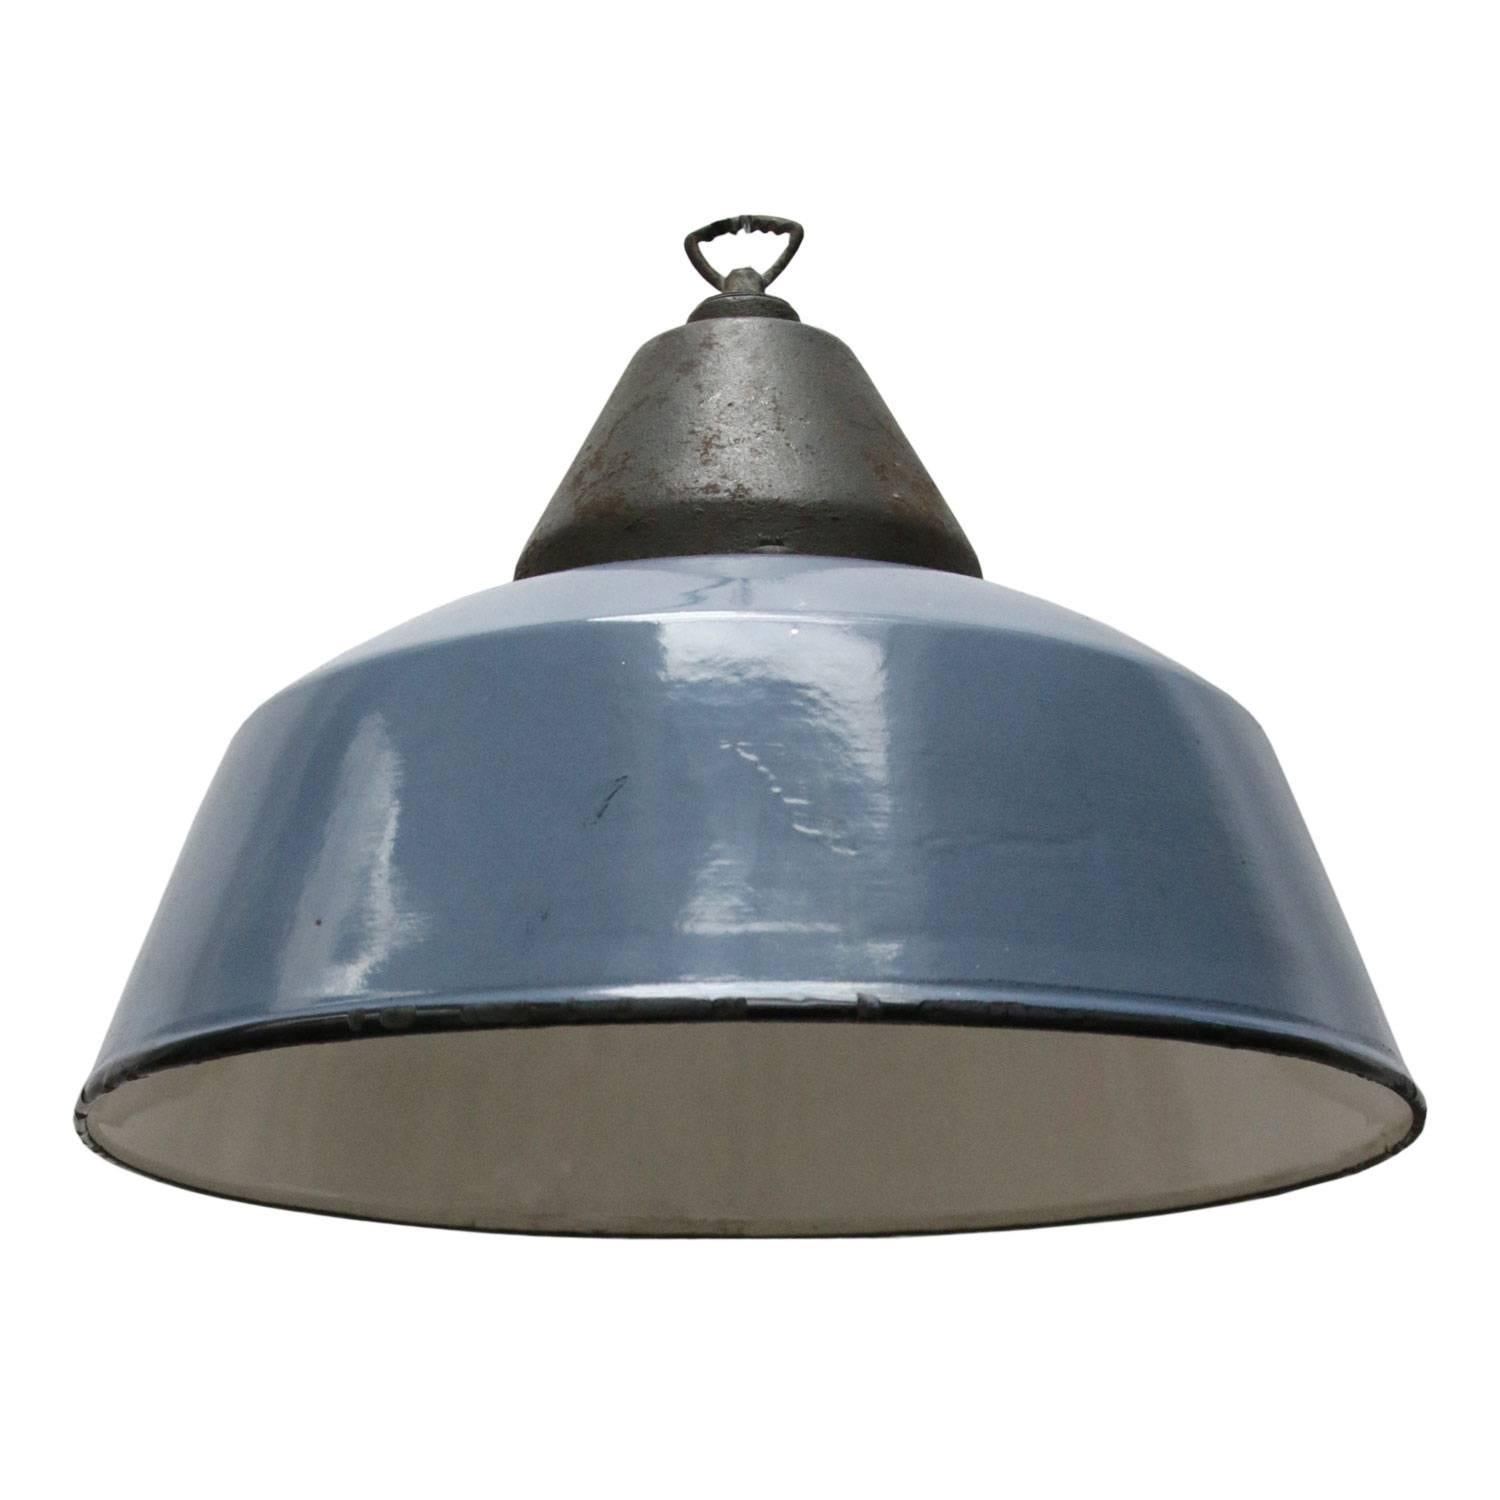 Factory hanging lamp. Blue enamel. White interior. Cast iron top.

Weight 5.0 kg / 11 lb

All lamps have been made suitable by international standards for incandescent light bulbs, energy-efficient and LED bulbs. E26/E27 bulb holders and new